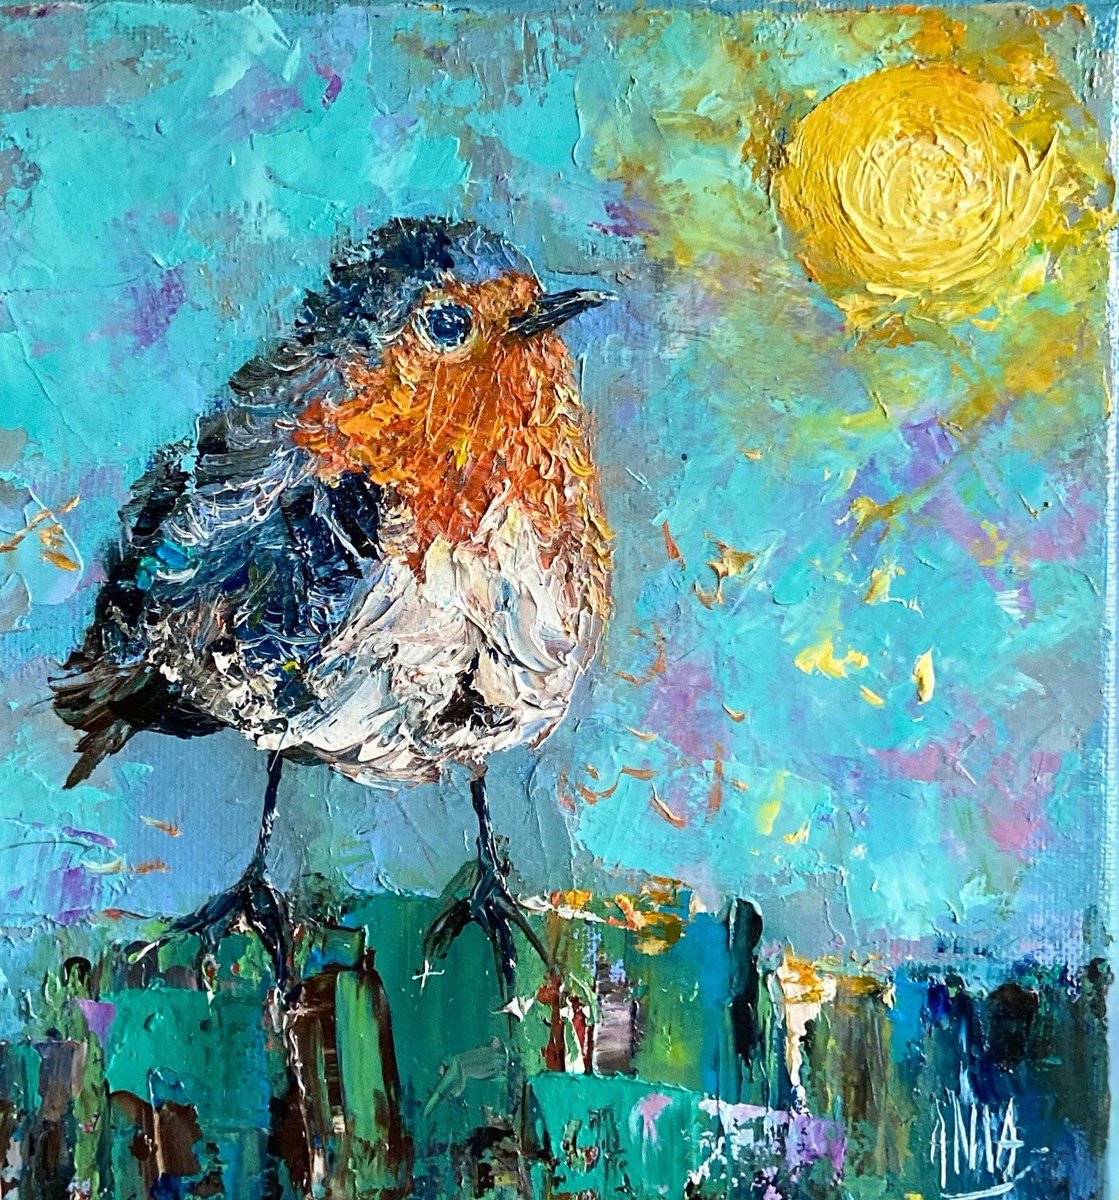 Step into a world of joy with my vibrant Robin bird oil painting, crafted using the palette knife technique. 🌞 Enjoy a 25% discount on all pieces in this Robin collection for one week only! 🎨 Don't miss out – bring home the positivity today. 🐦✨ #ArtSale #RobinPainting